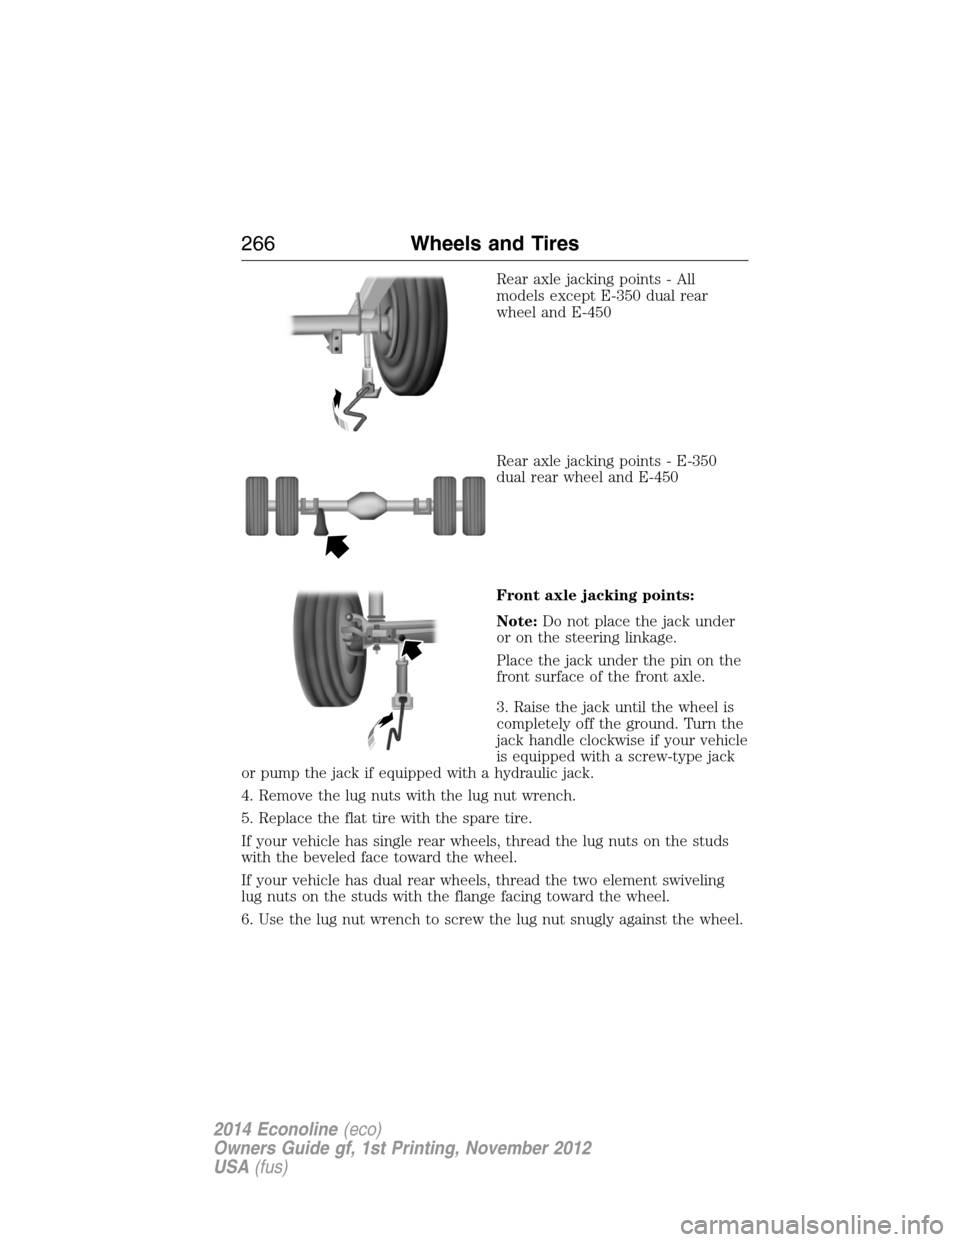 FORD E SERIES 2014 4.G Owners Manual Rear axle jacking points - All
models except E-350 dual rear
wheel and E-450
Rear axle jacking points - E-350
dual rear wheel and E-450
Front axle jacking points:
Note:Do not place the jack under
or o